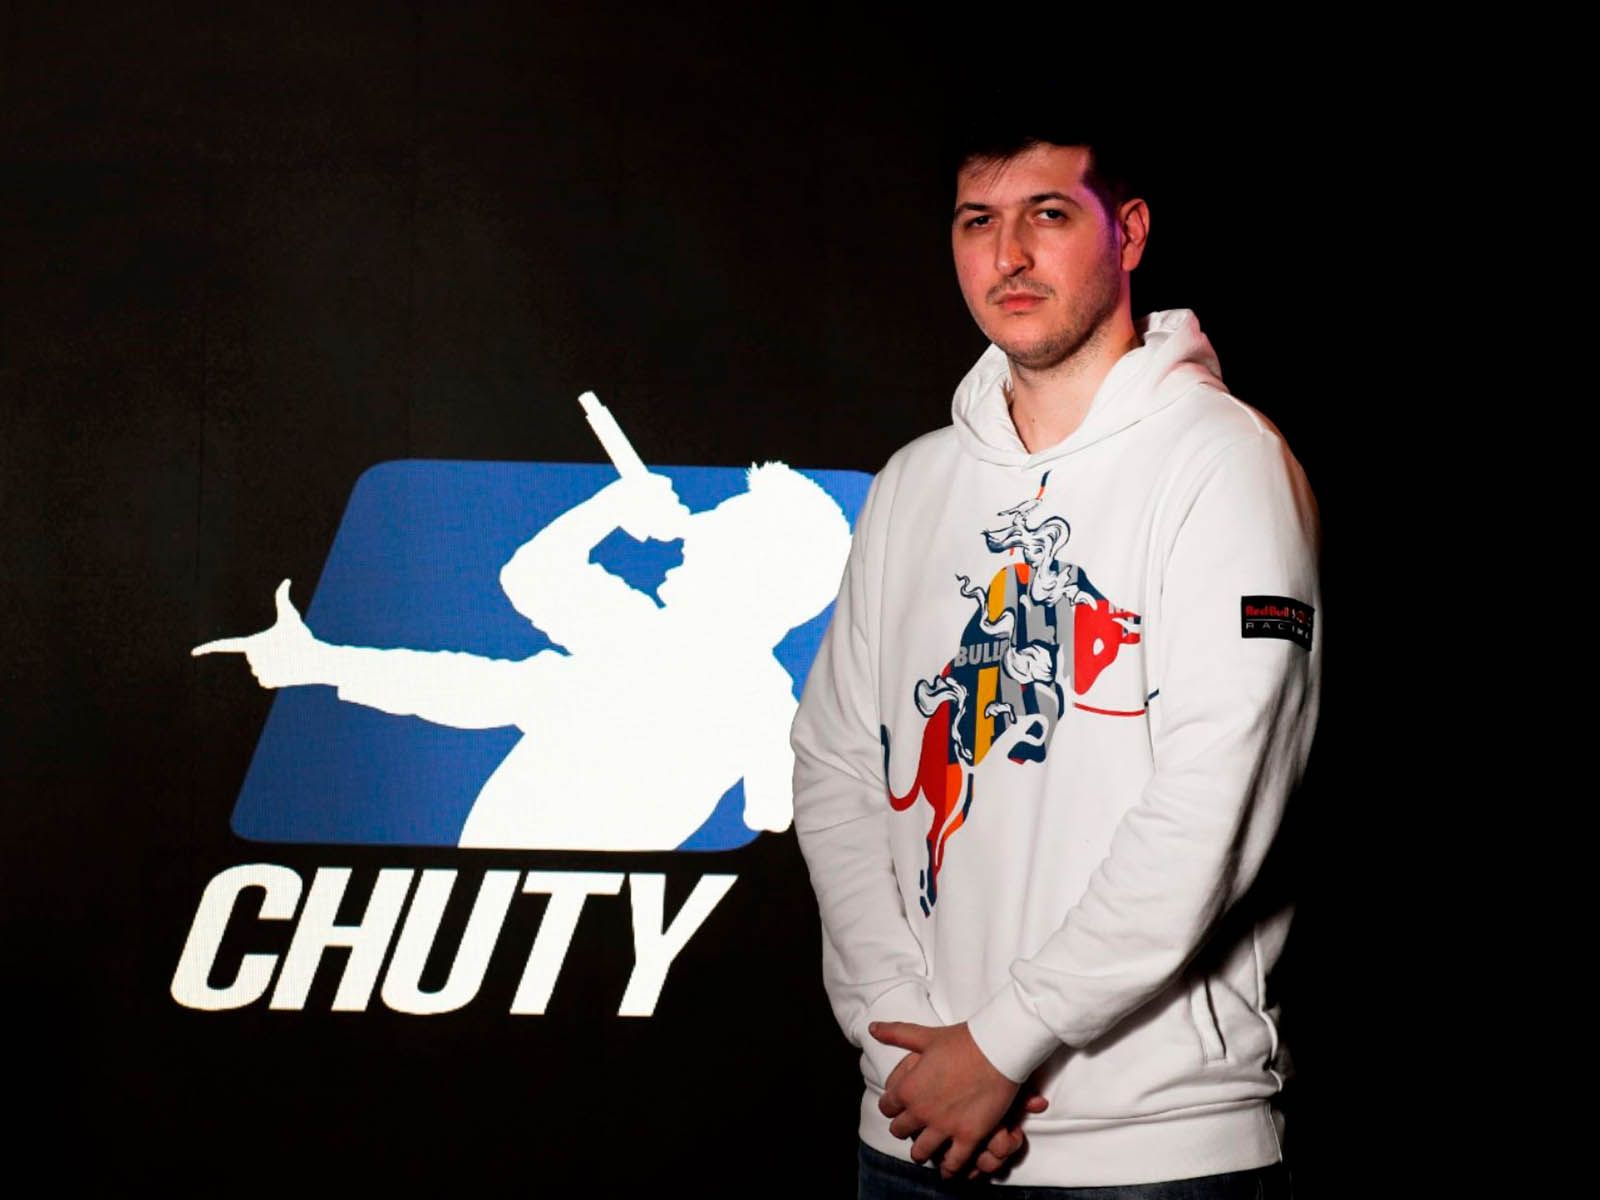 Chuty returns to Red Bull Batalla after five years without participation